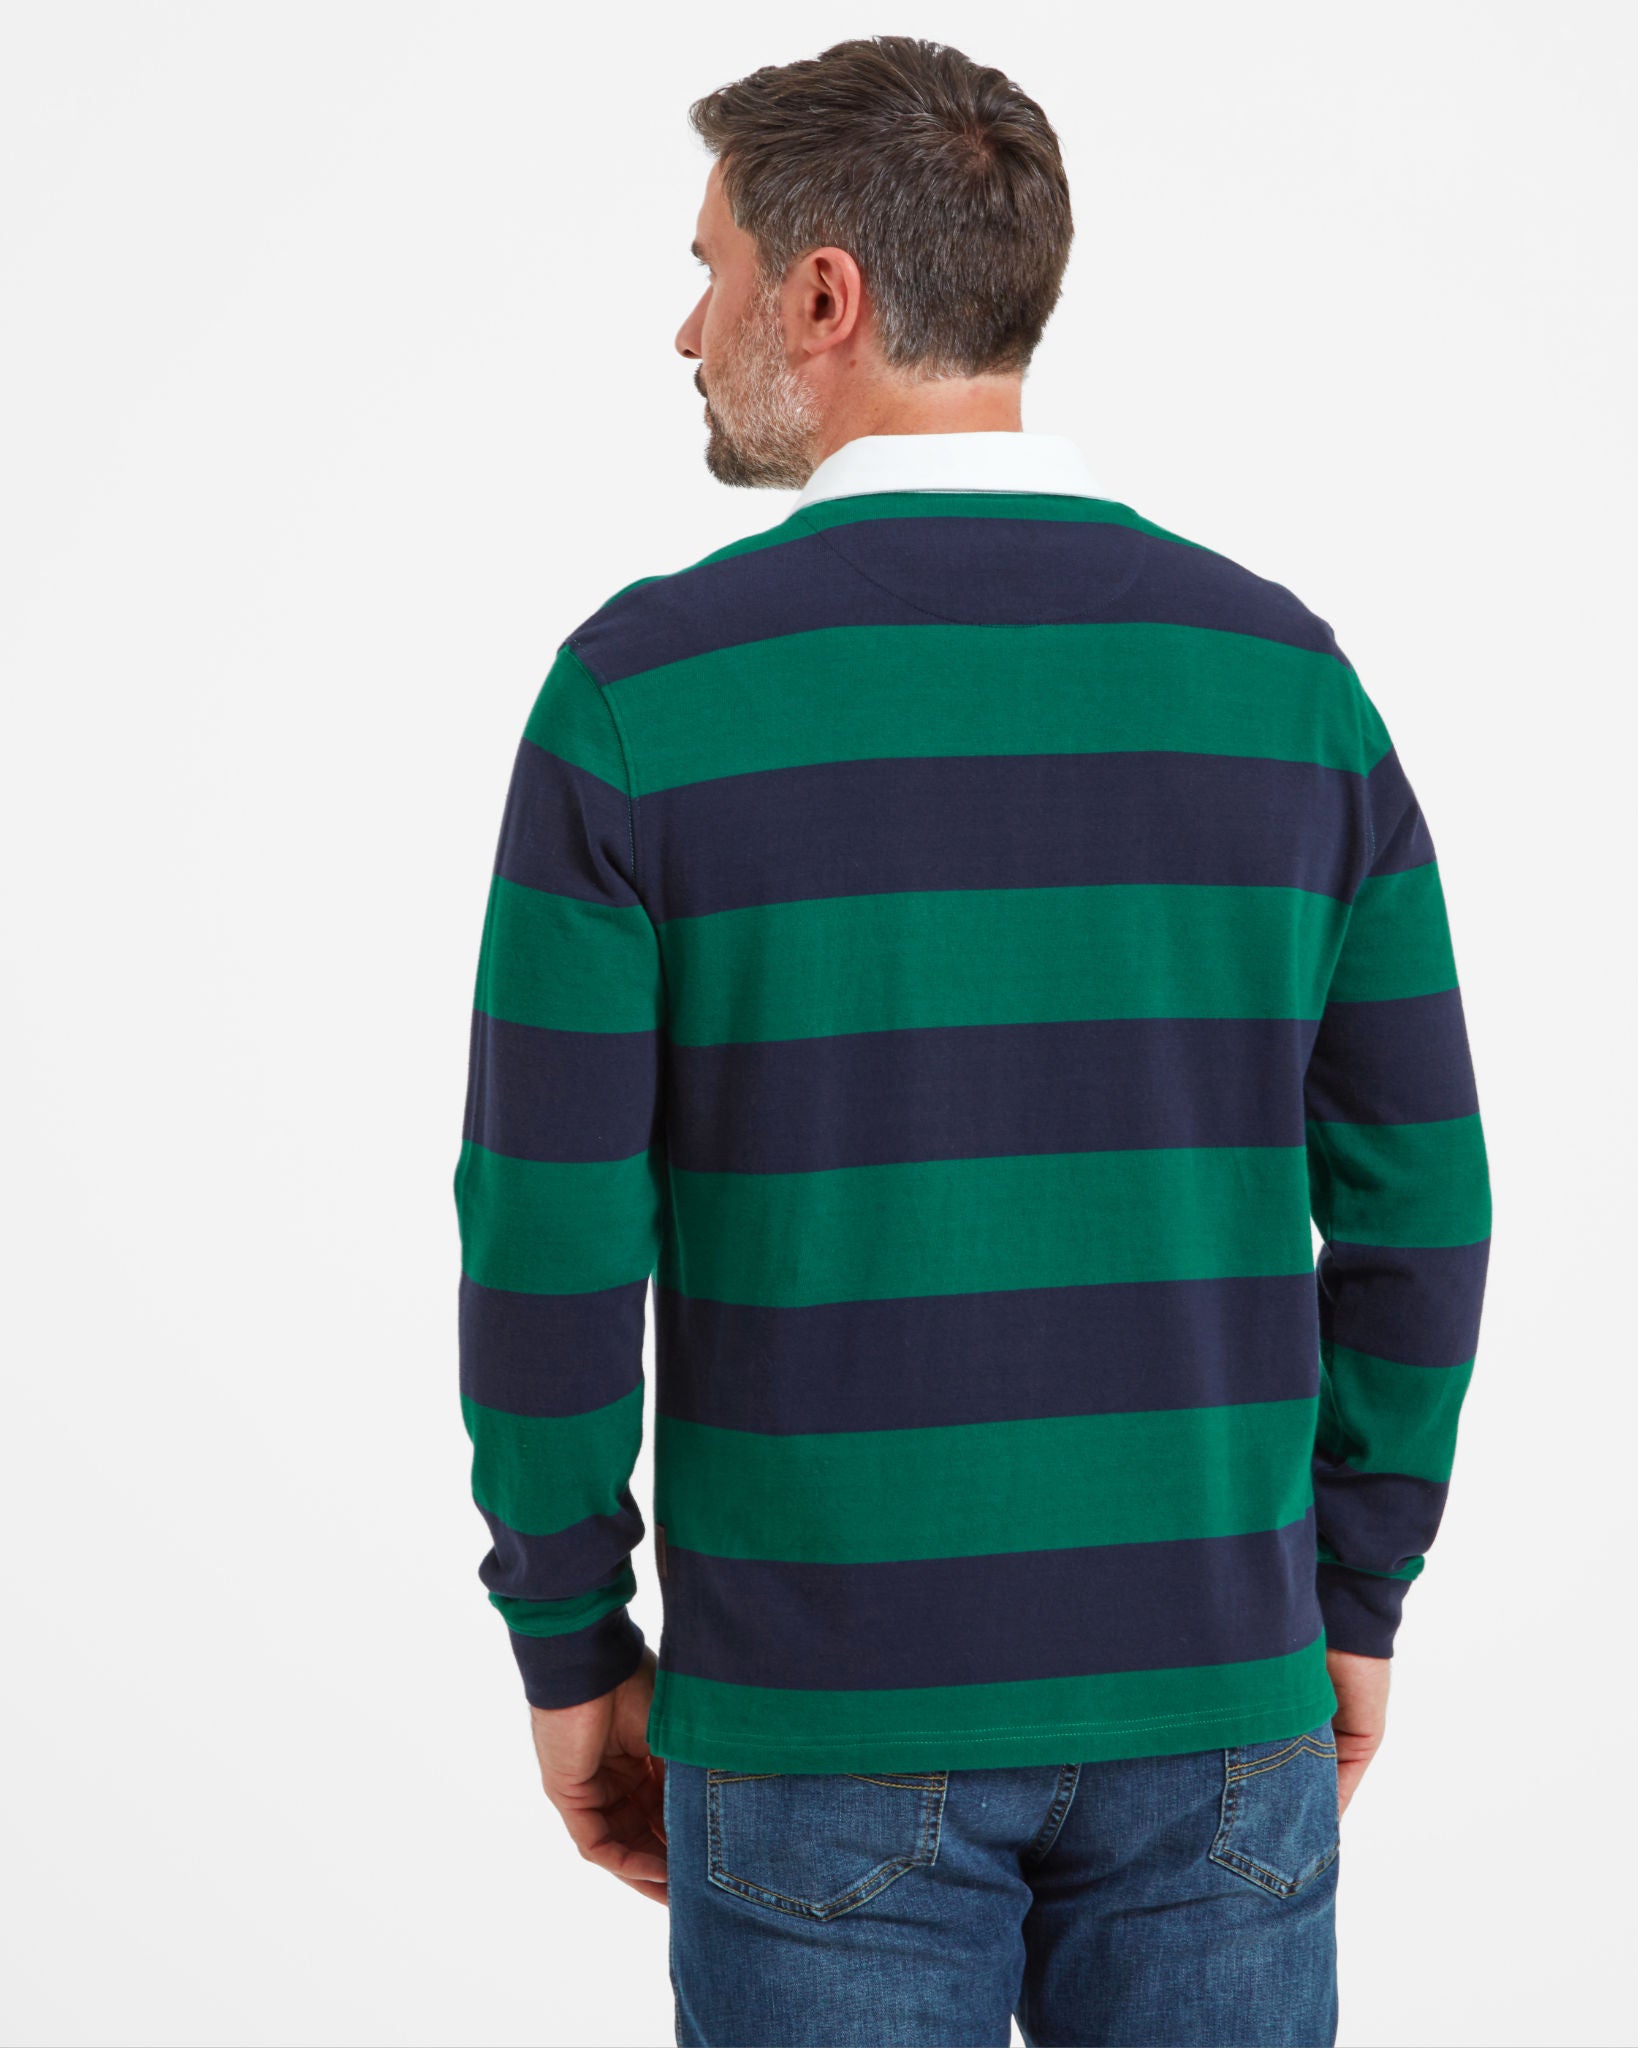 St Mawes Rugby Shirt - Navy/Green Stripe